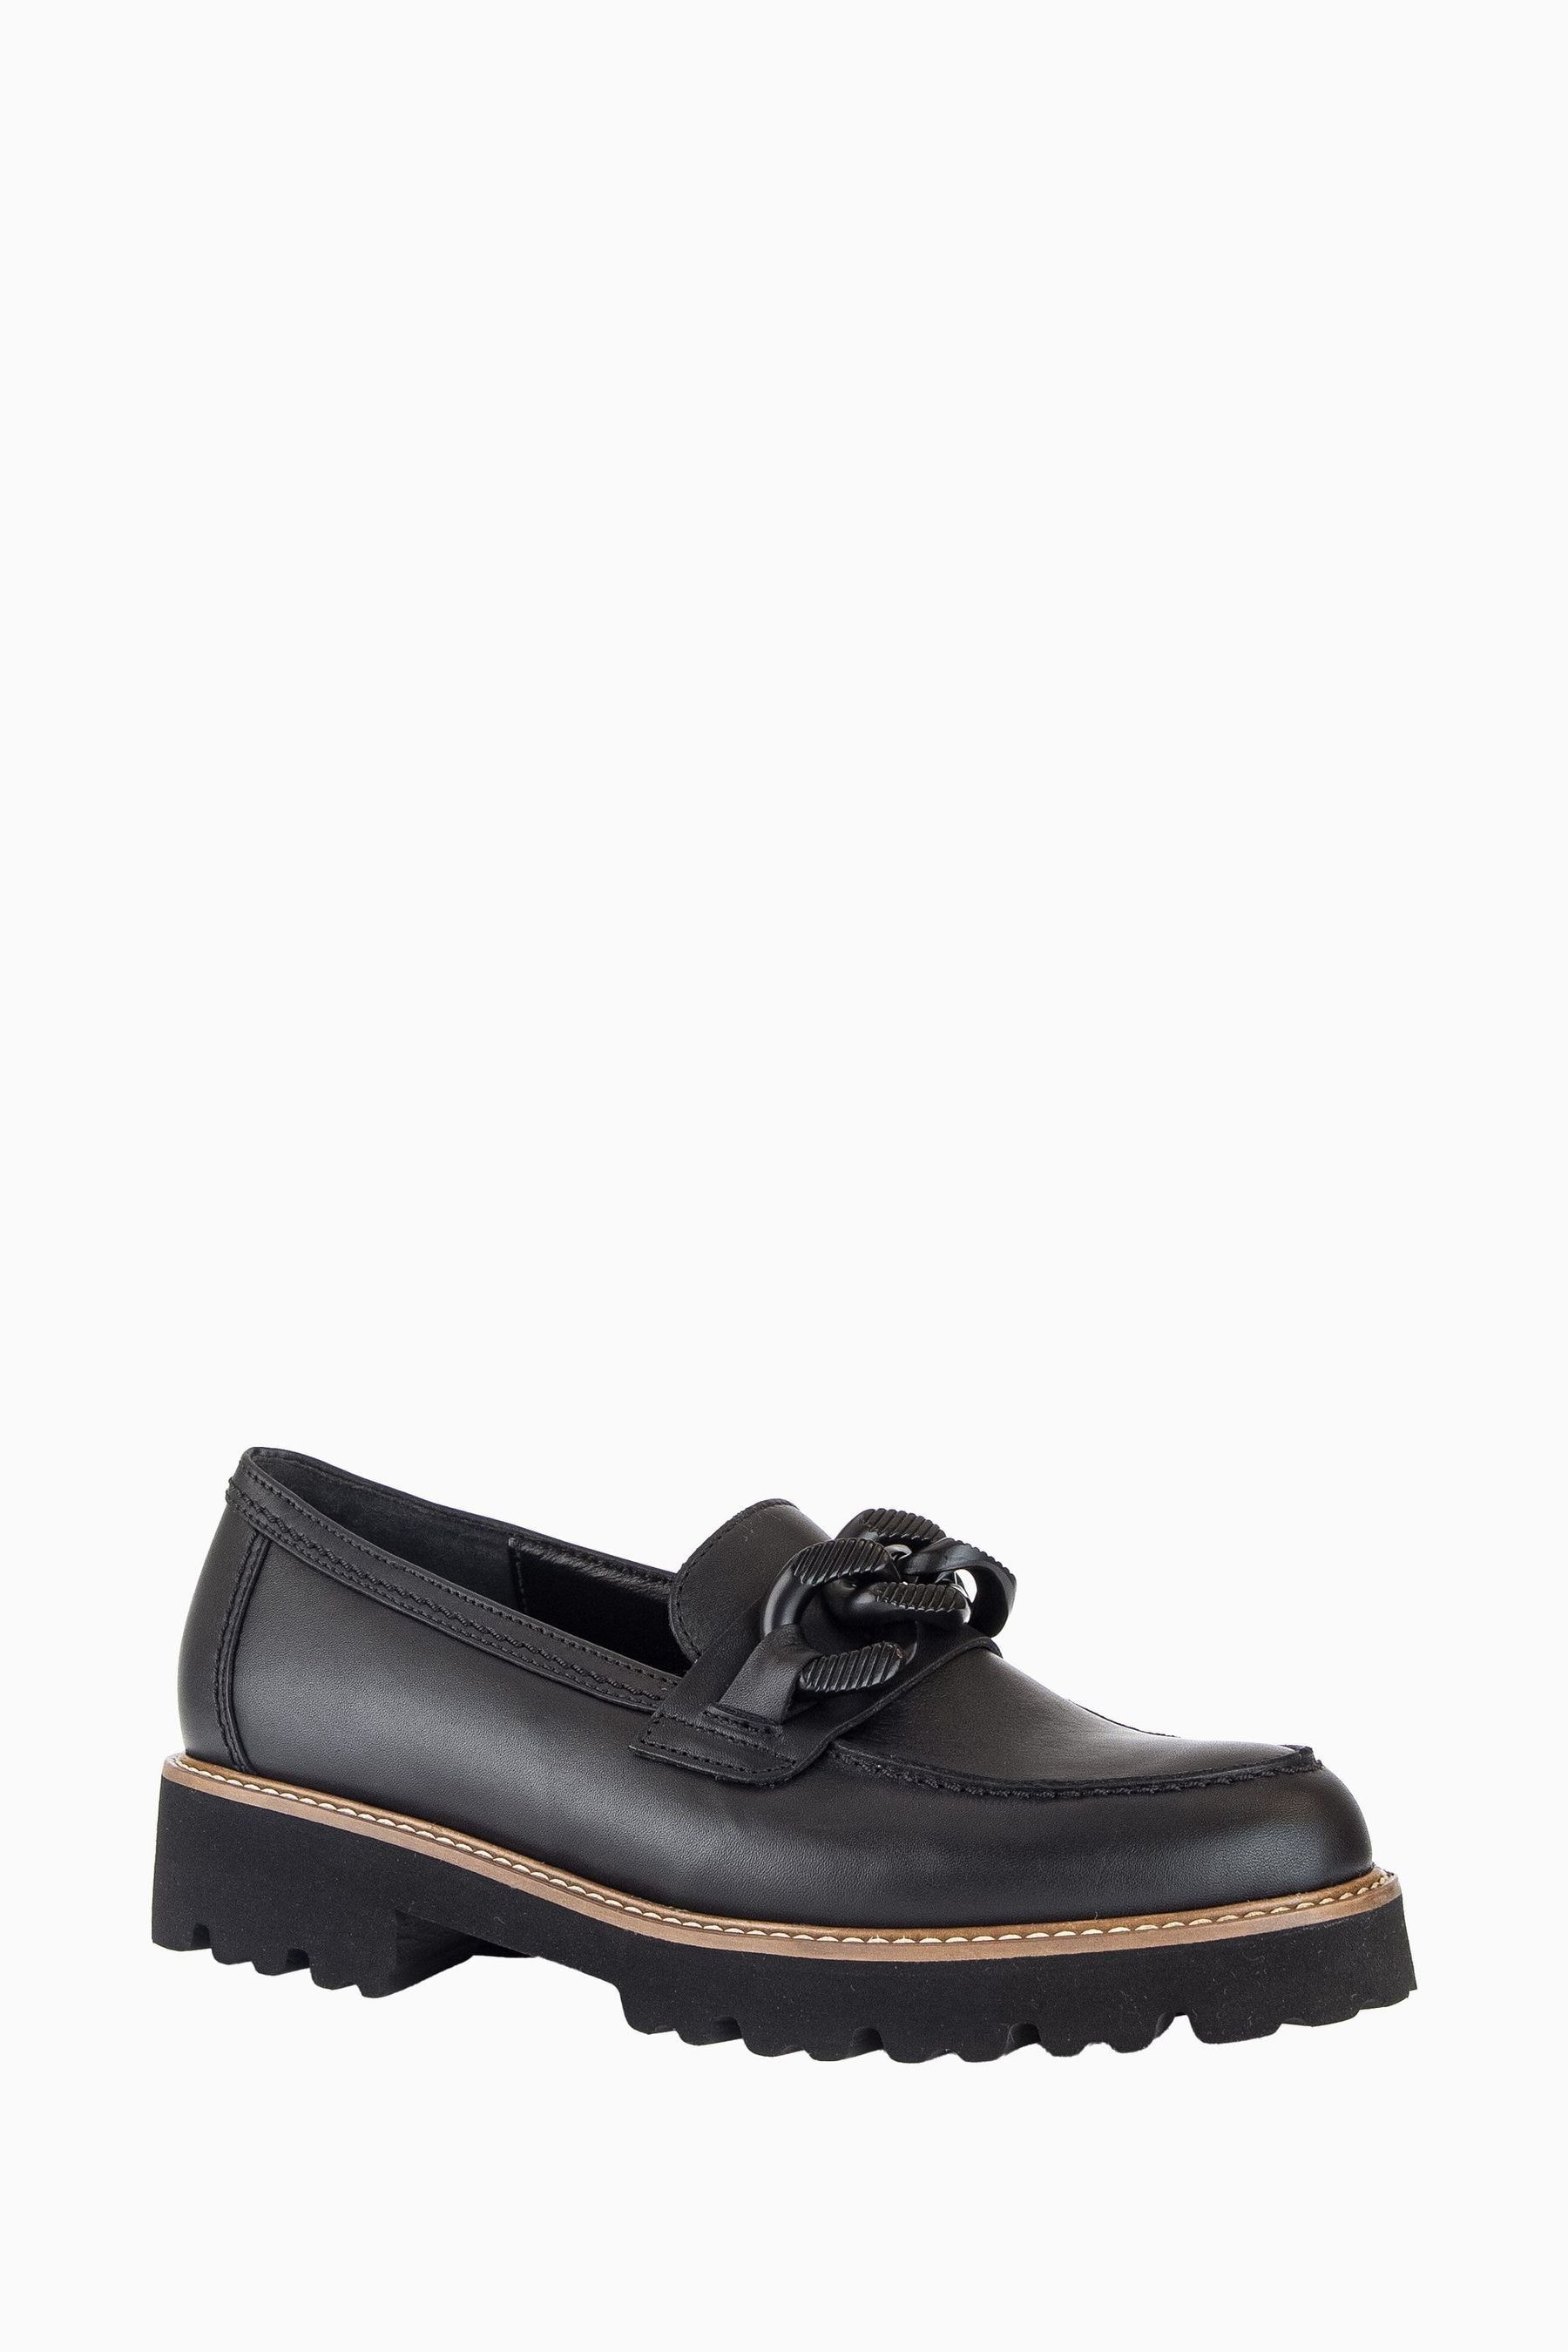 Buy Gabor Squeeze Black Leather Loafers from the Next UK online shop